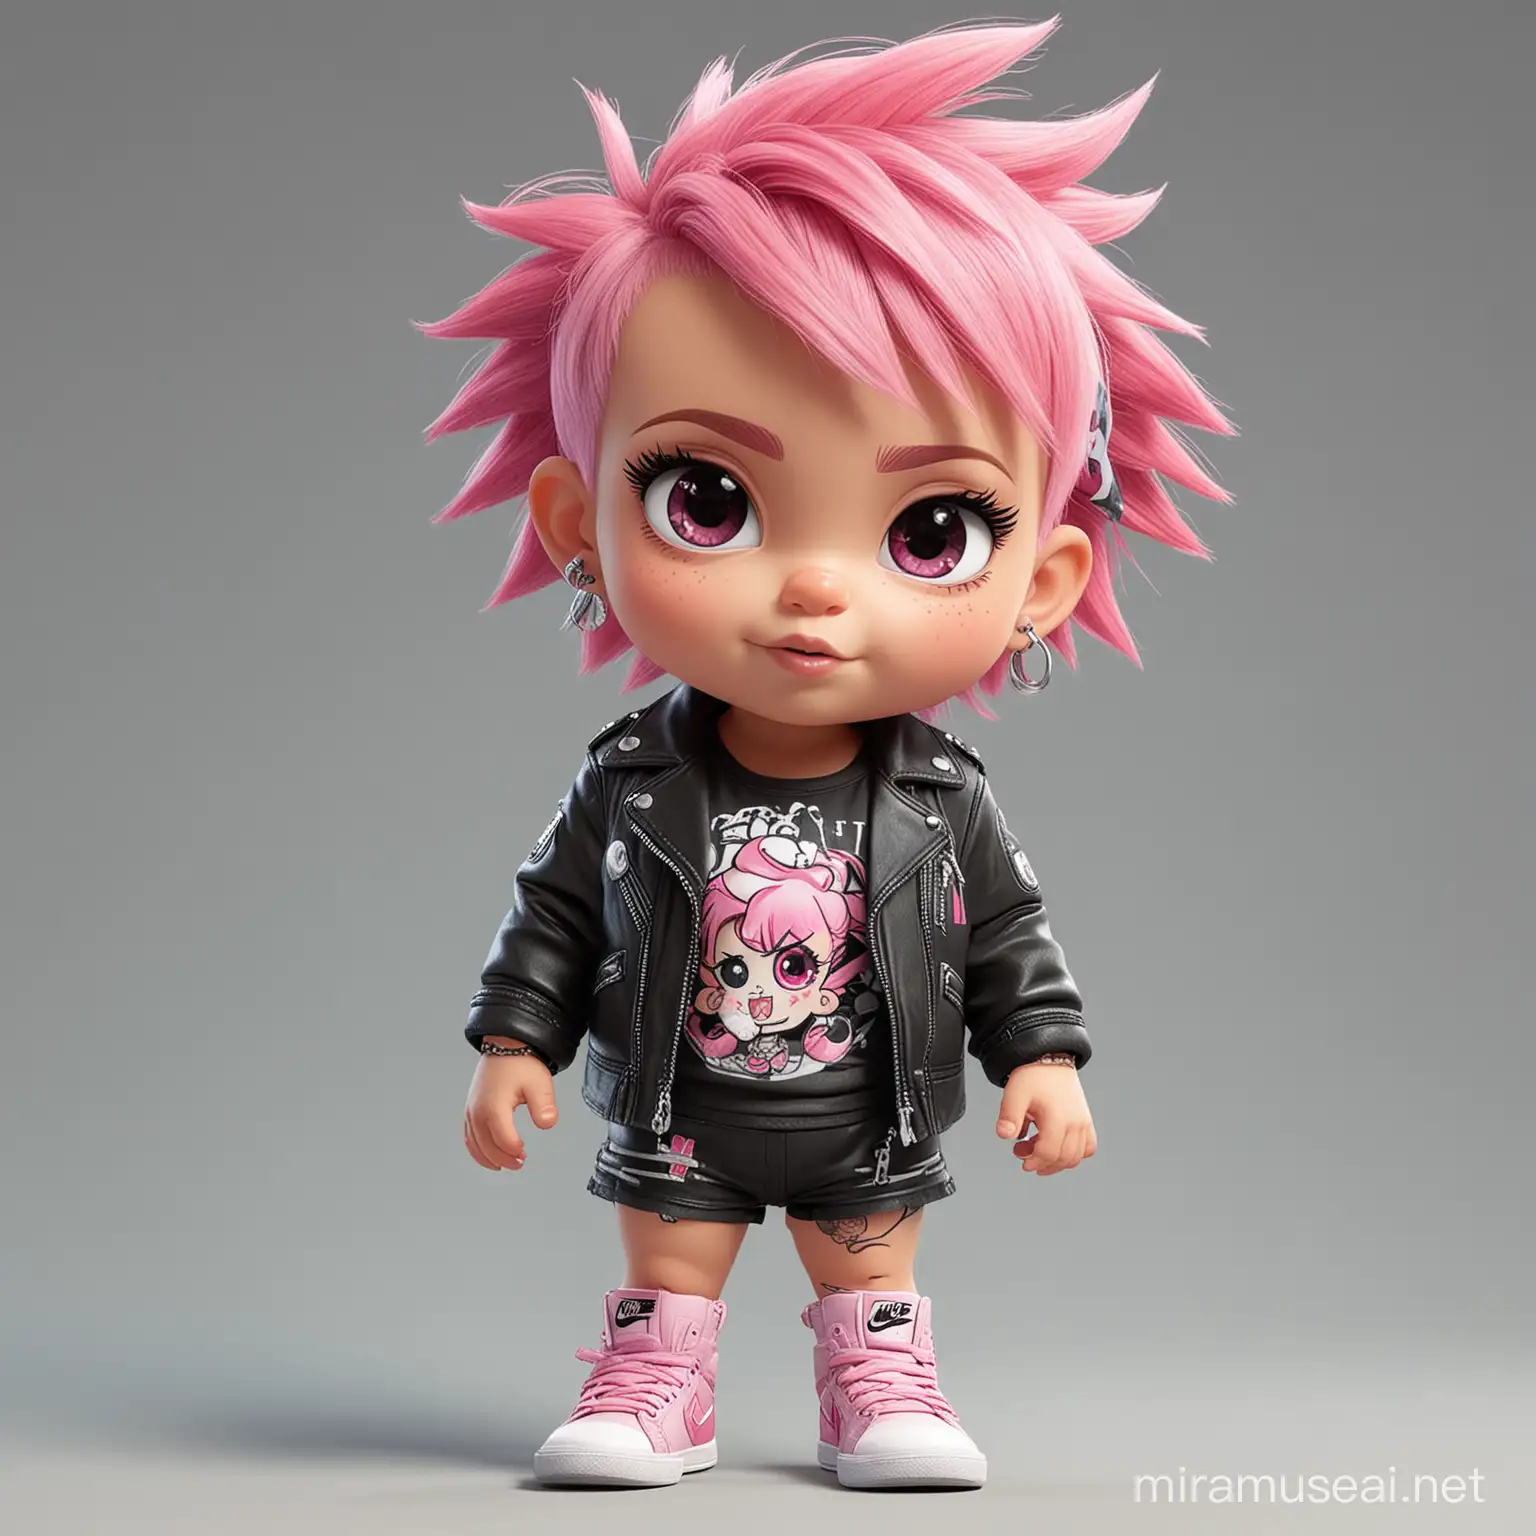 4k Cute cartoon baby punk with pink crest hair and piercing wearing leather jacket and diaper and nike sneakers